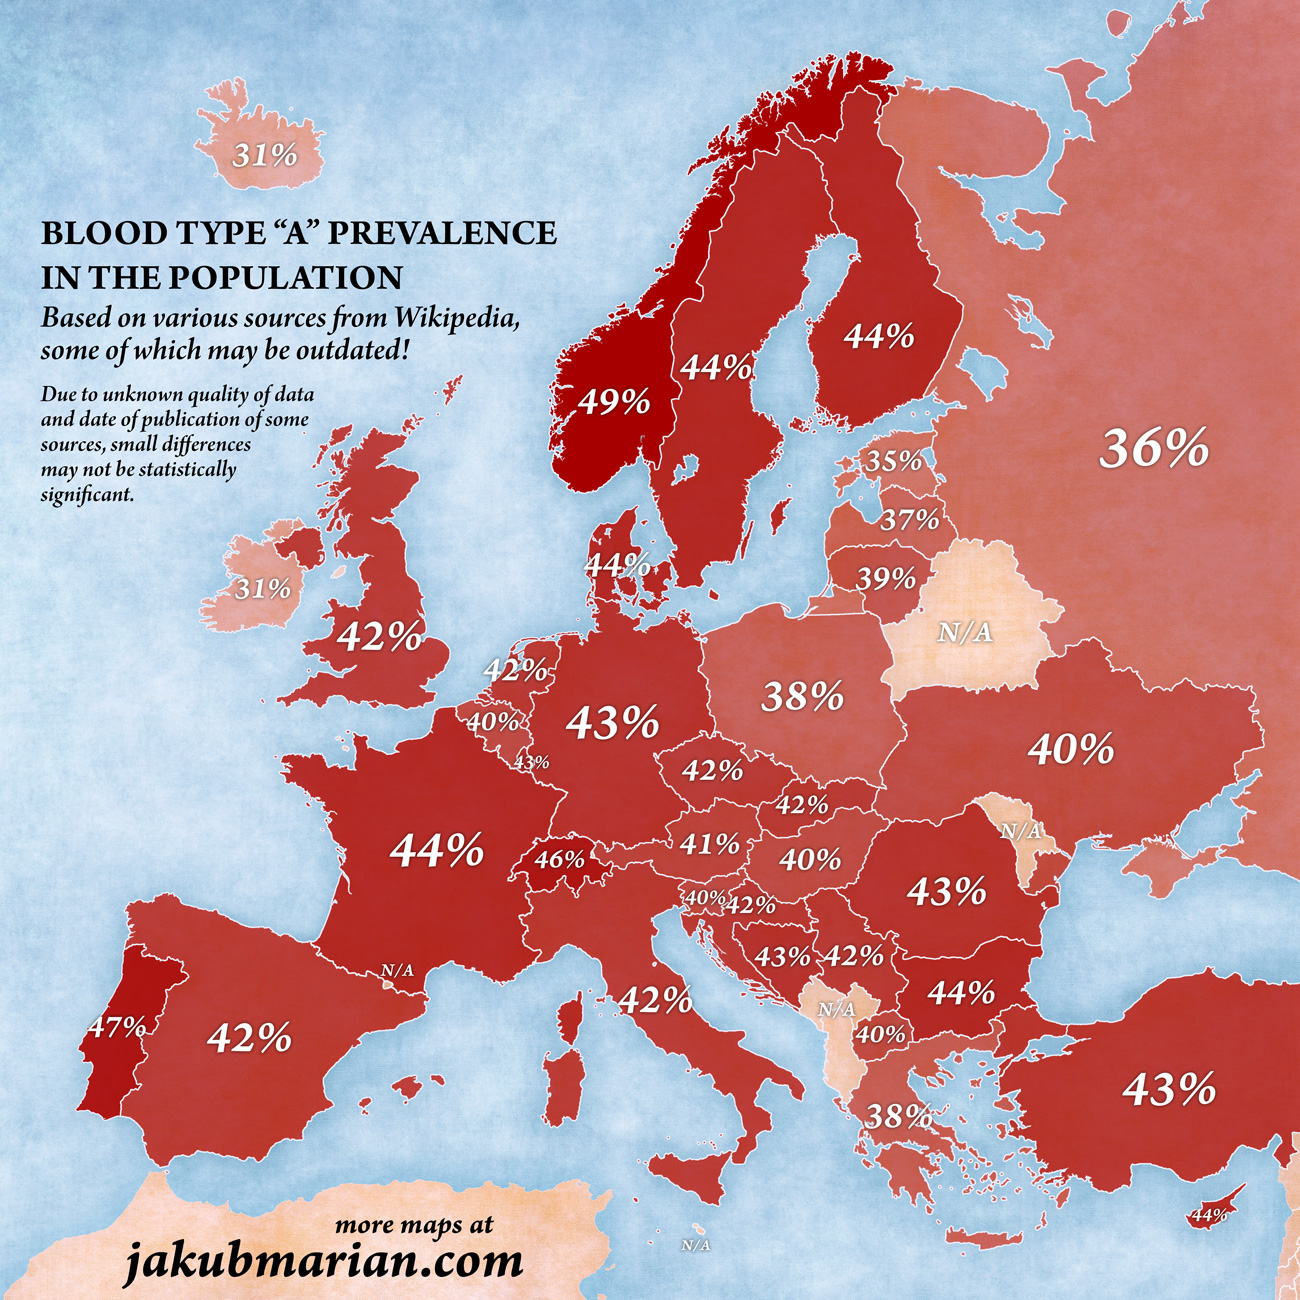 Blood Type Distribution By Country In Europe